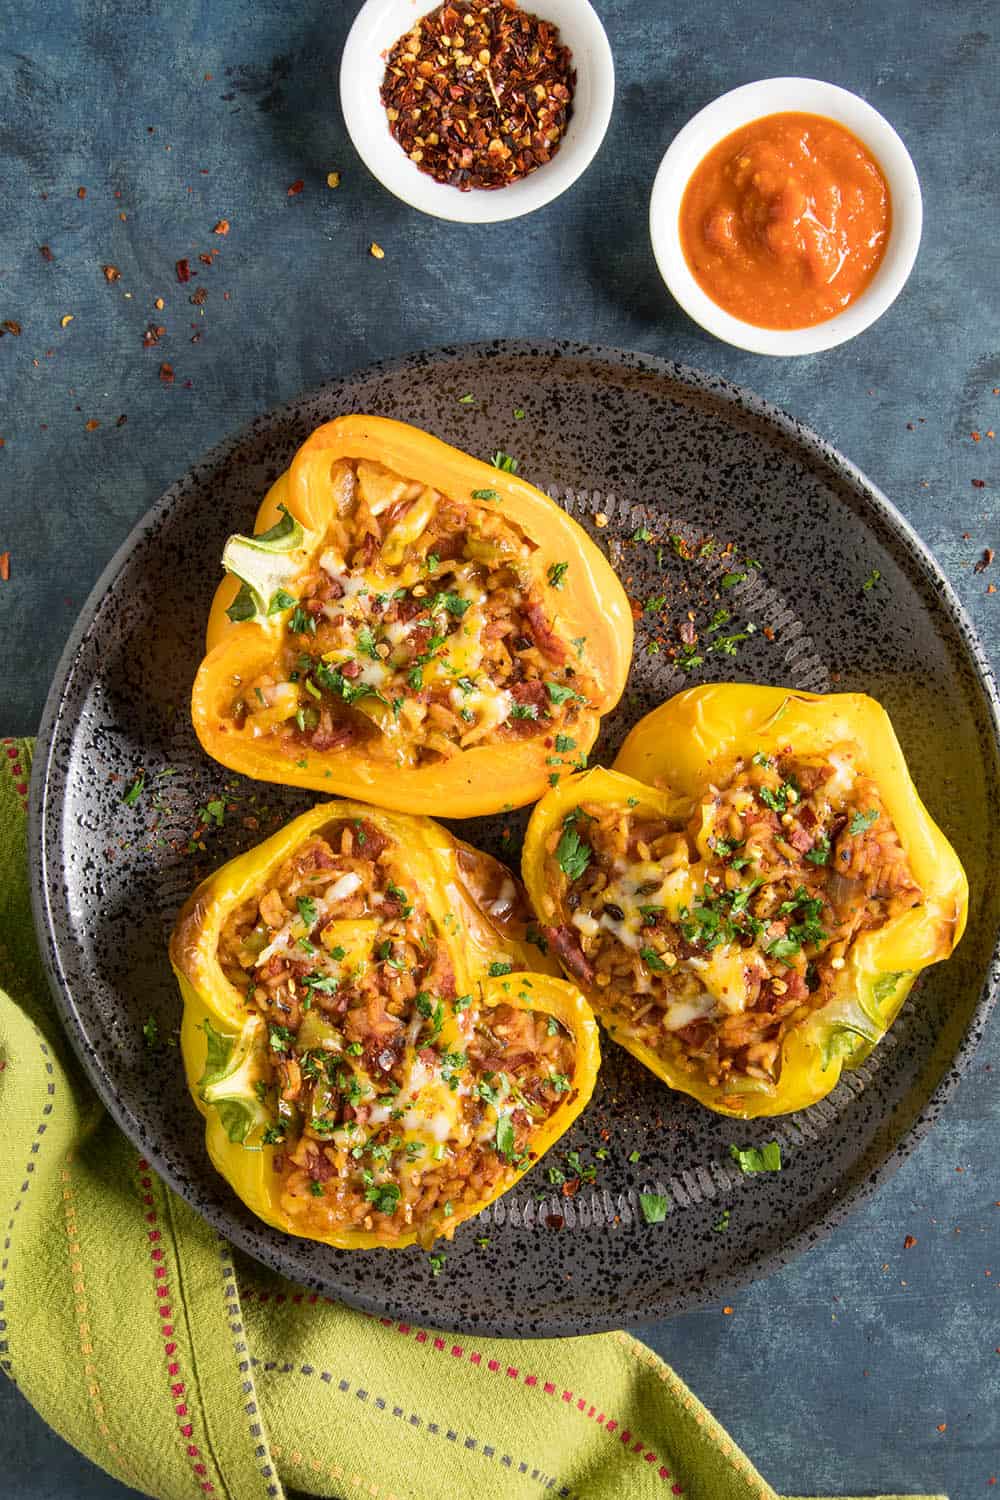 These Vegetarian Stuffed Peppers are ready to eat!